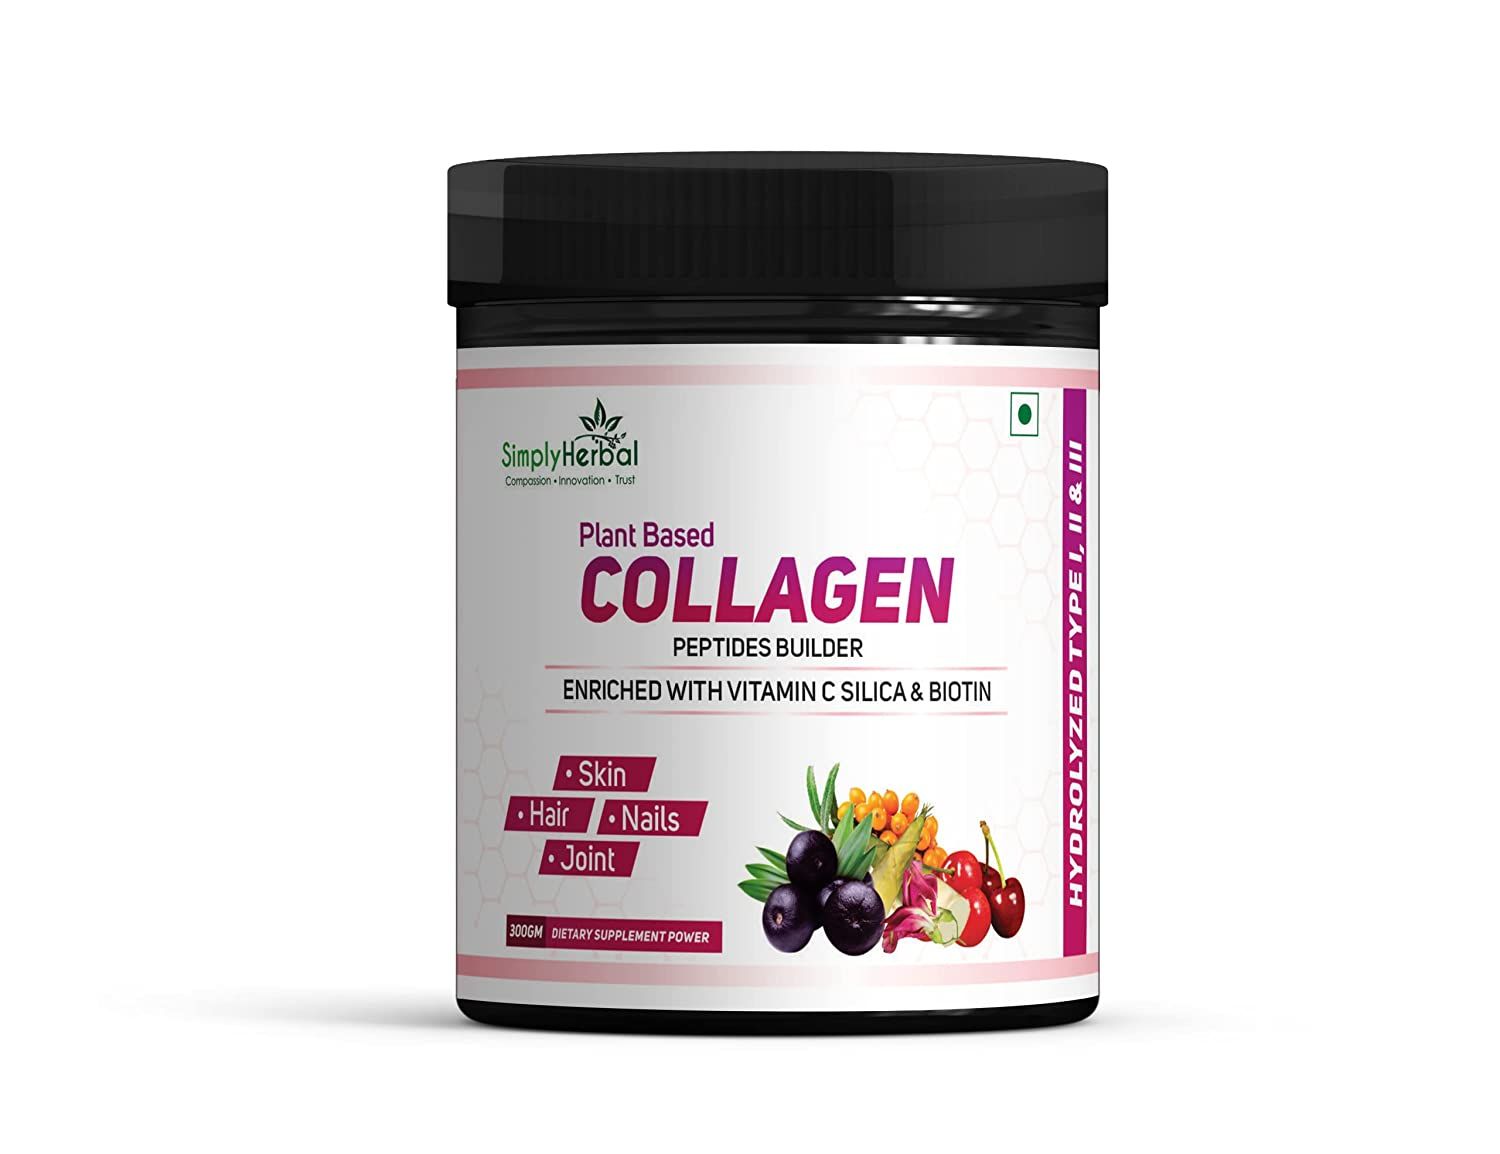 Simply Herbal Plant Based Collagen Image